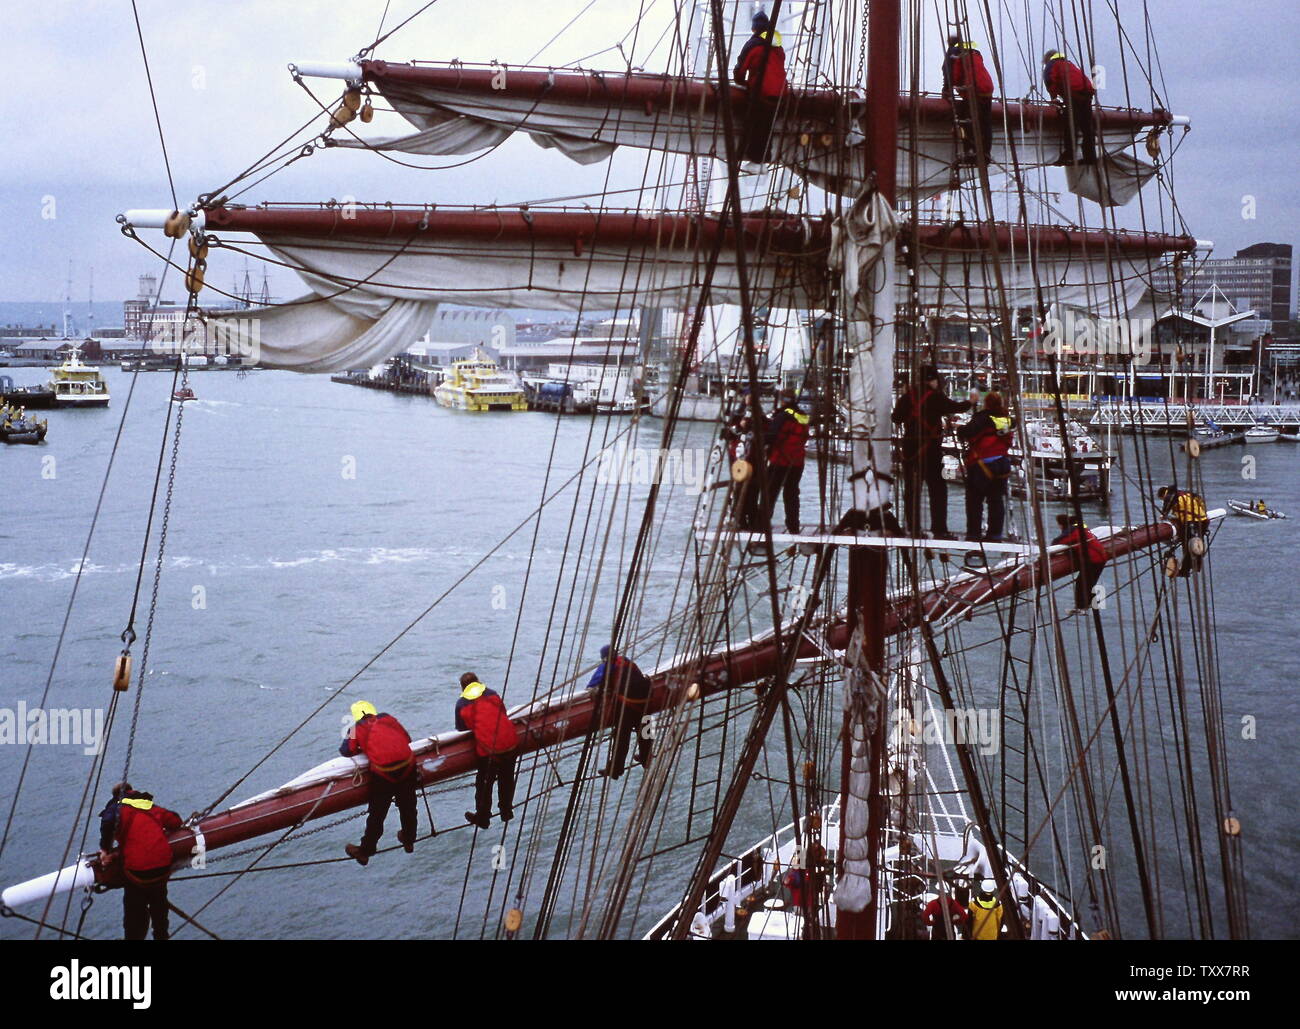 AJAXNETPHOTO. PORTSMOUTH, ENGLAND. - TALL SHIP SAILING - CREW OF THE TALL SHIP PRINCE WILLIAM FURLING SAIL BEFORE ENTERING HARBOUR. PHOTO:JONATHAN EASTLAND/AJAX REF:131208_177 Stock Photo